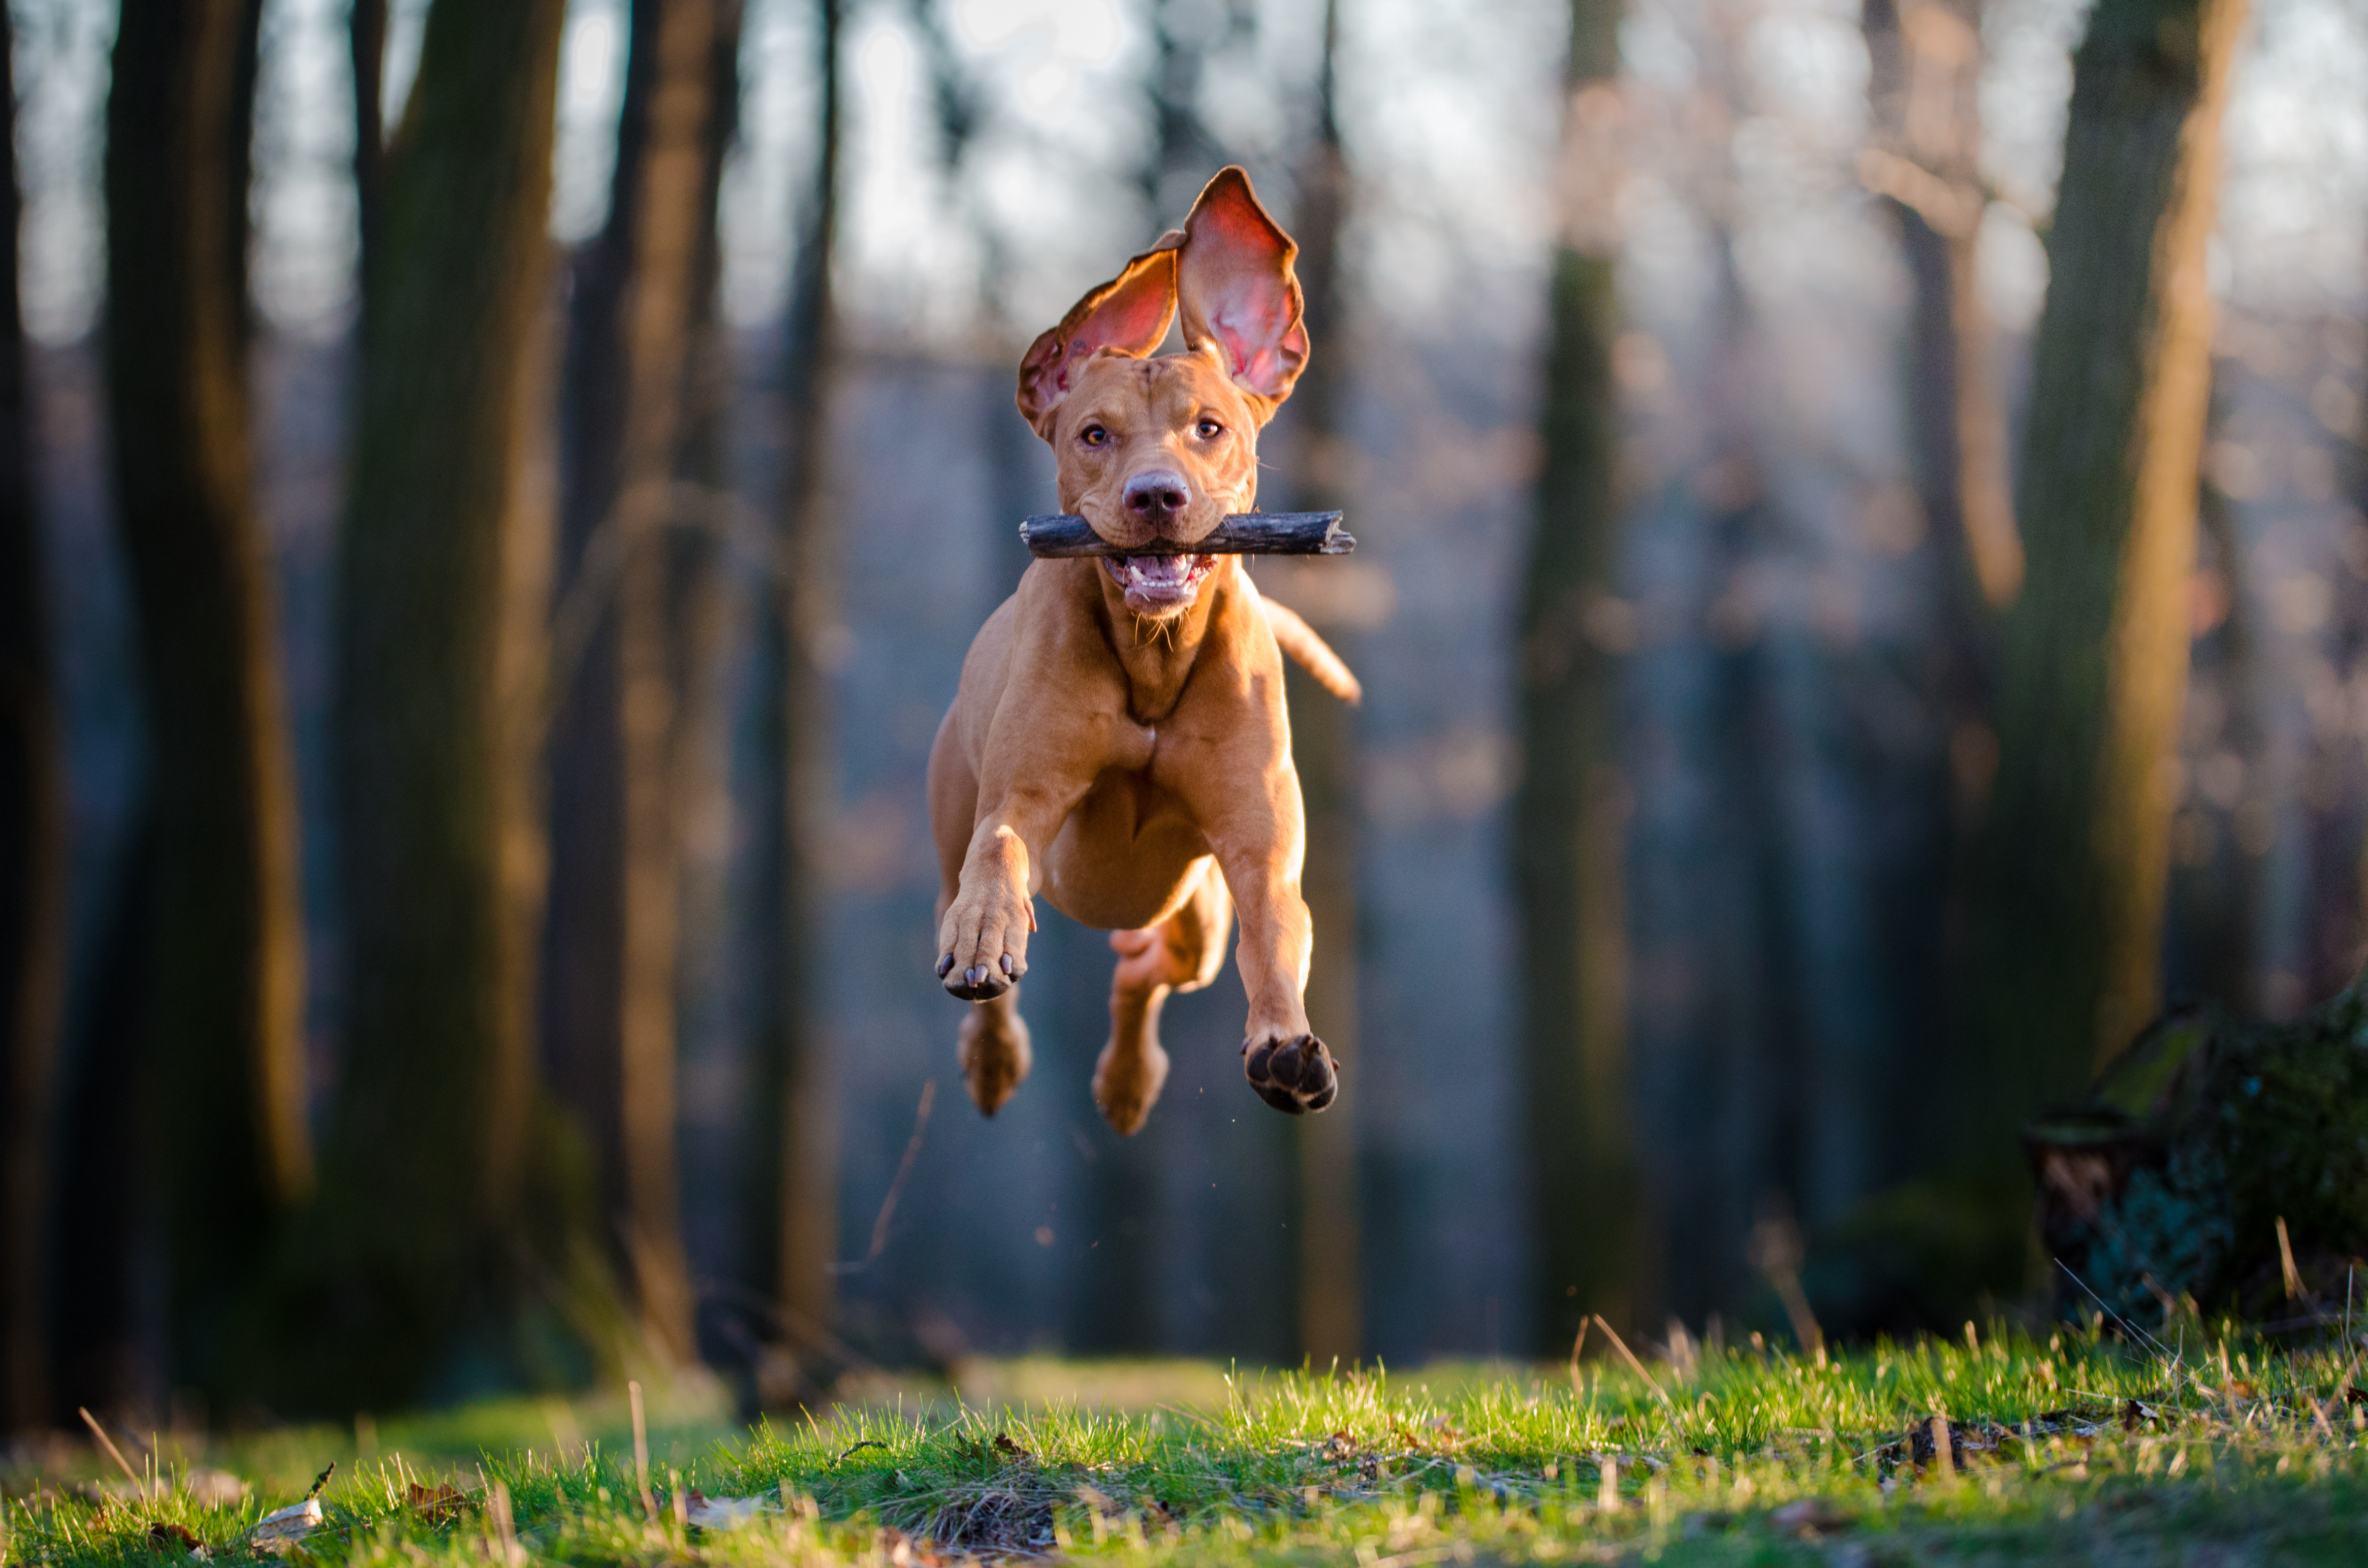 A Dog jumps in the wood.